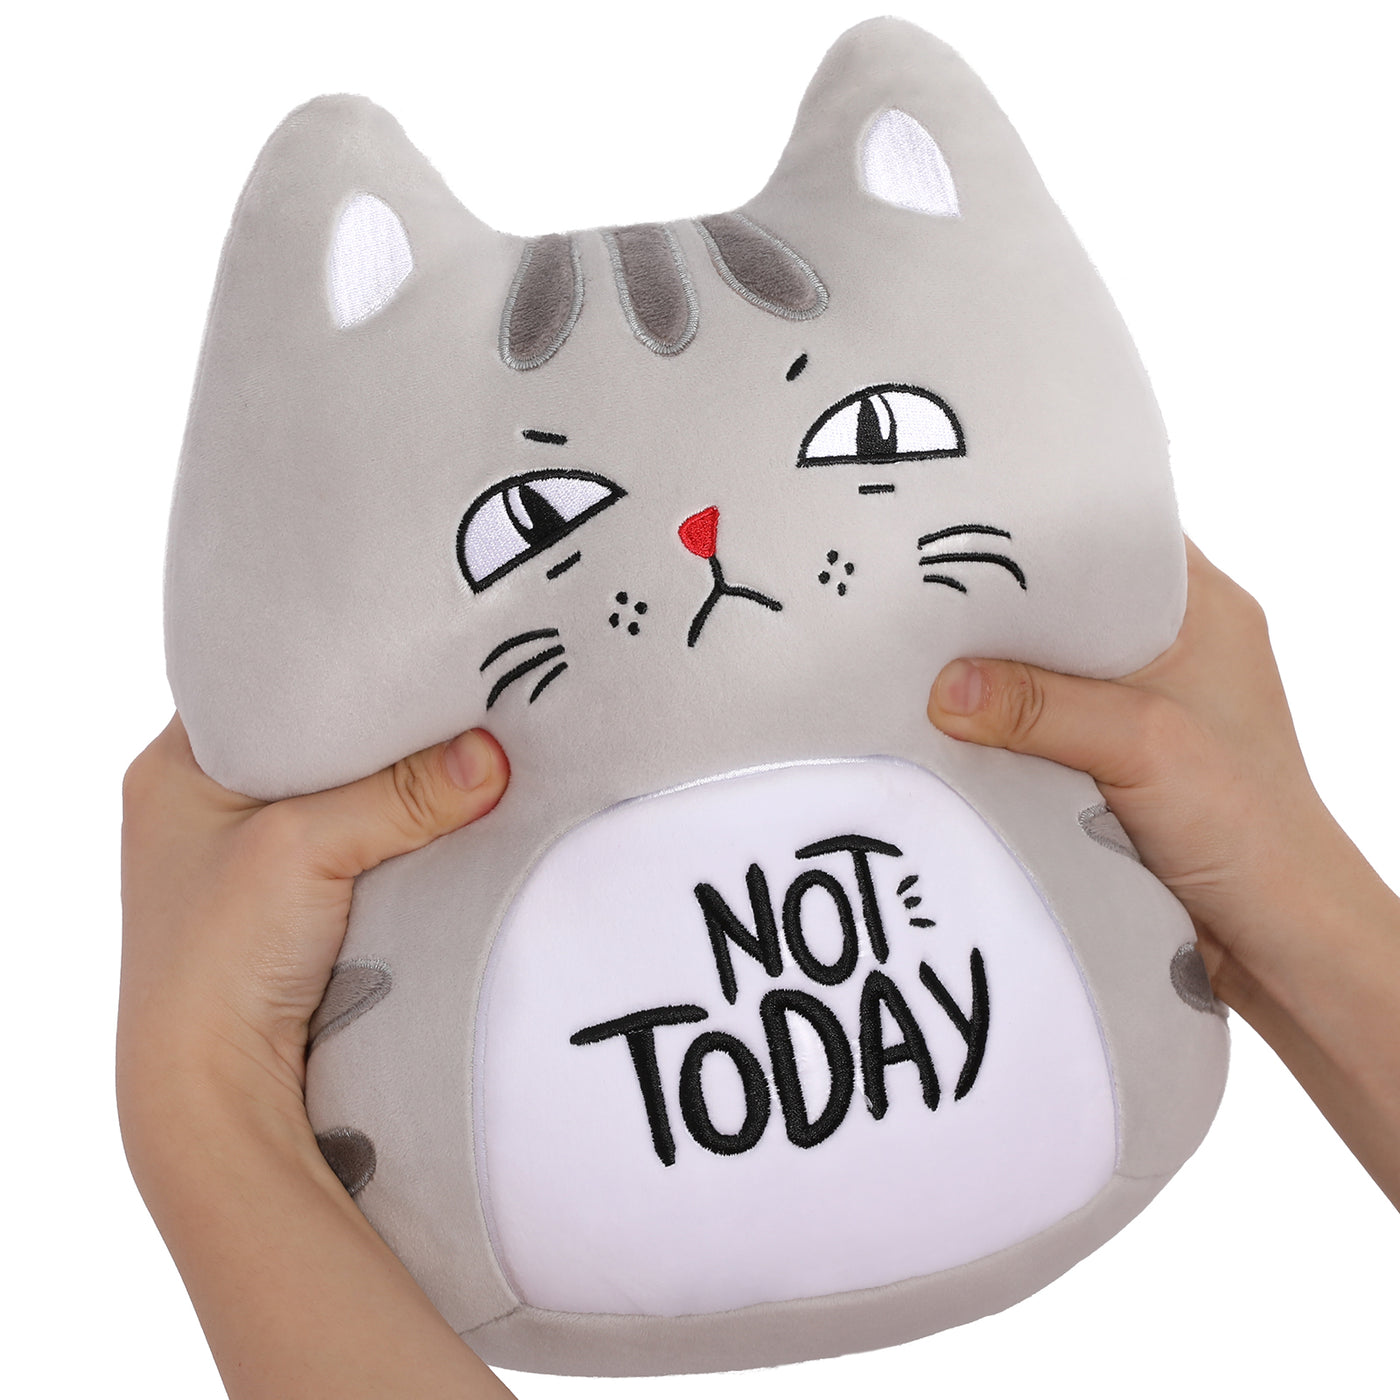 Not Today - Cat Plush Toy, 10 Inches - MorisMos Stuffed Animals